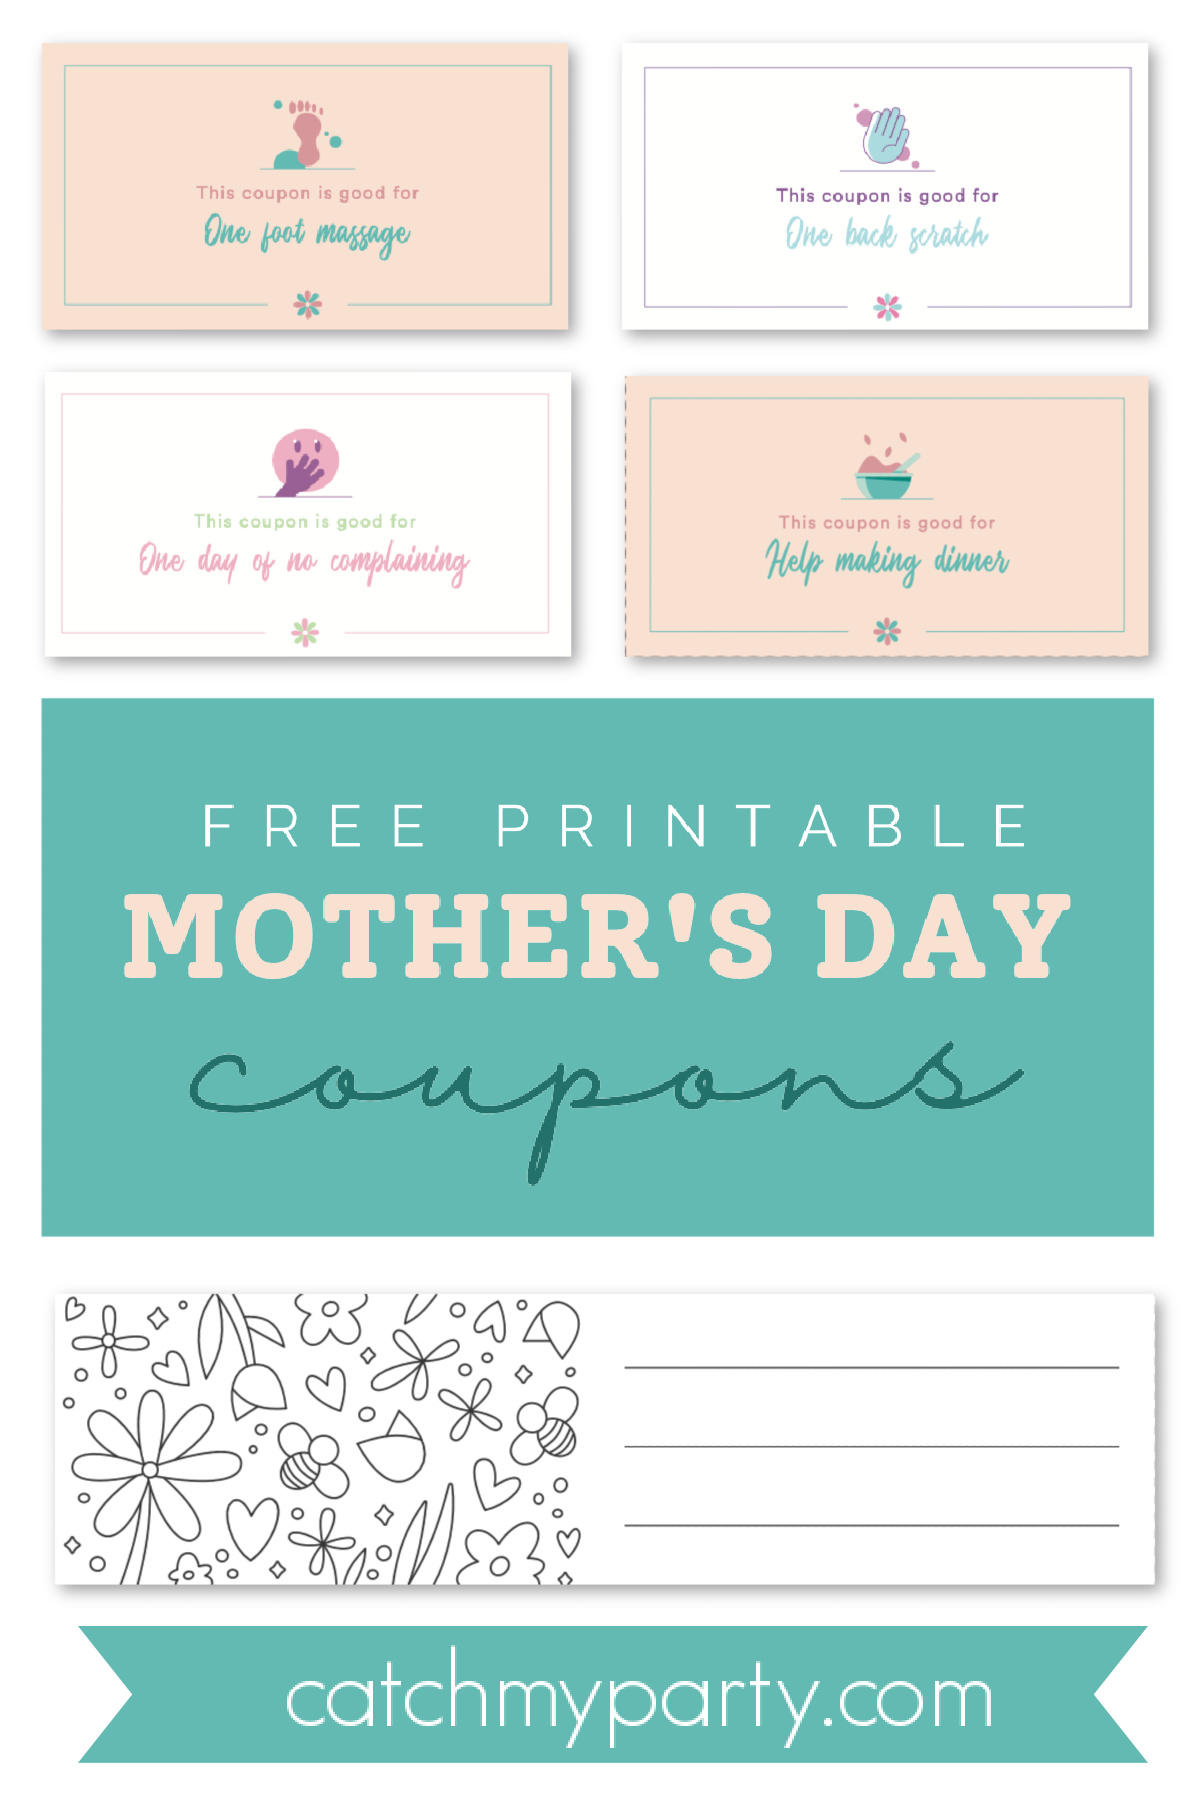 Download These Free Mother's Day Coupons for Your Mom!